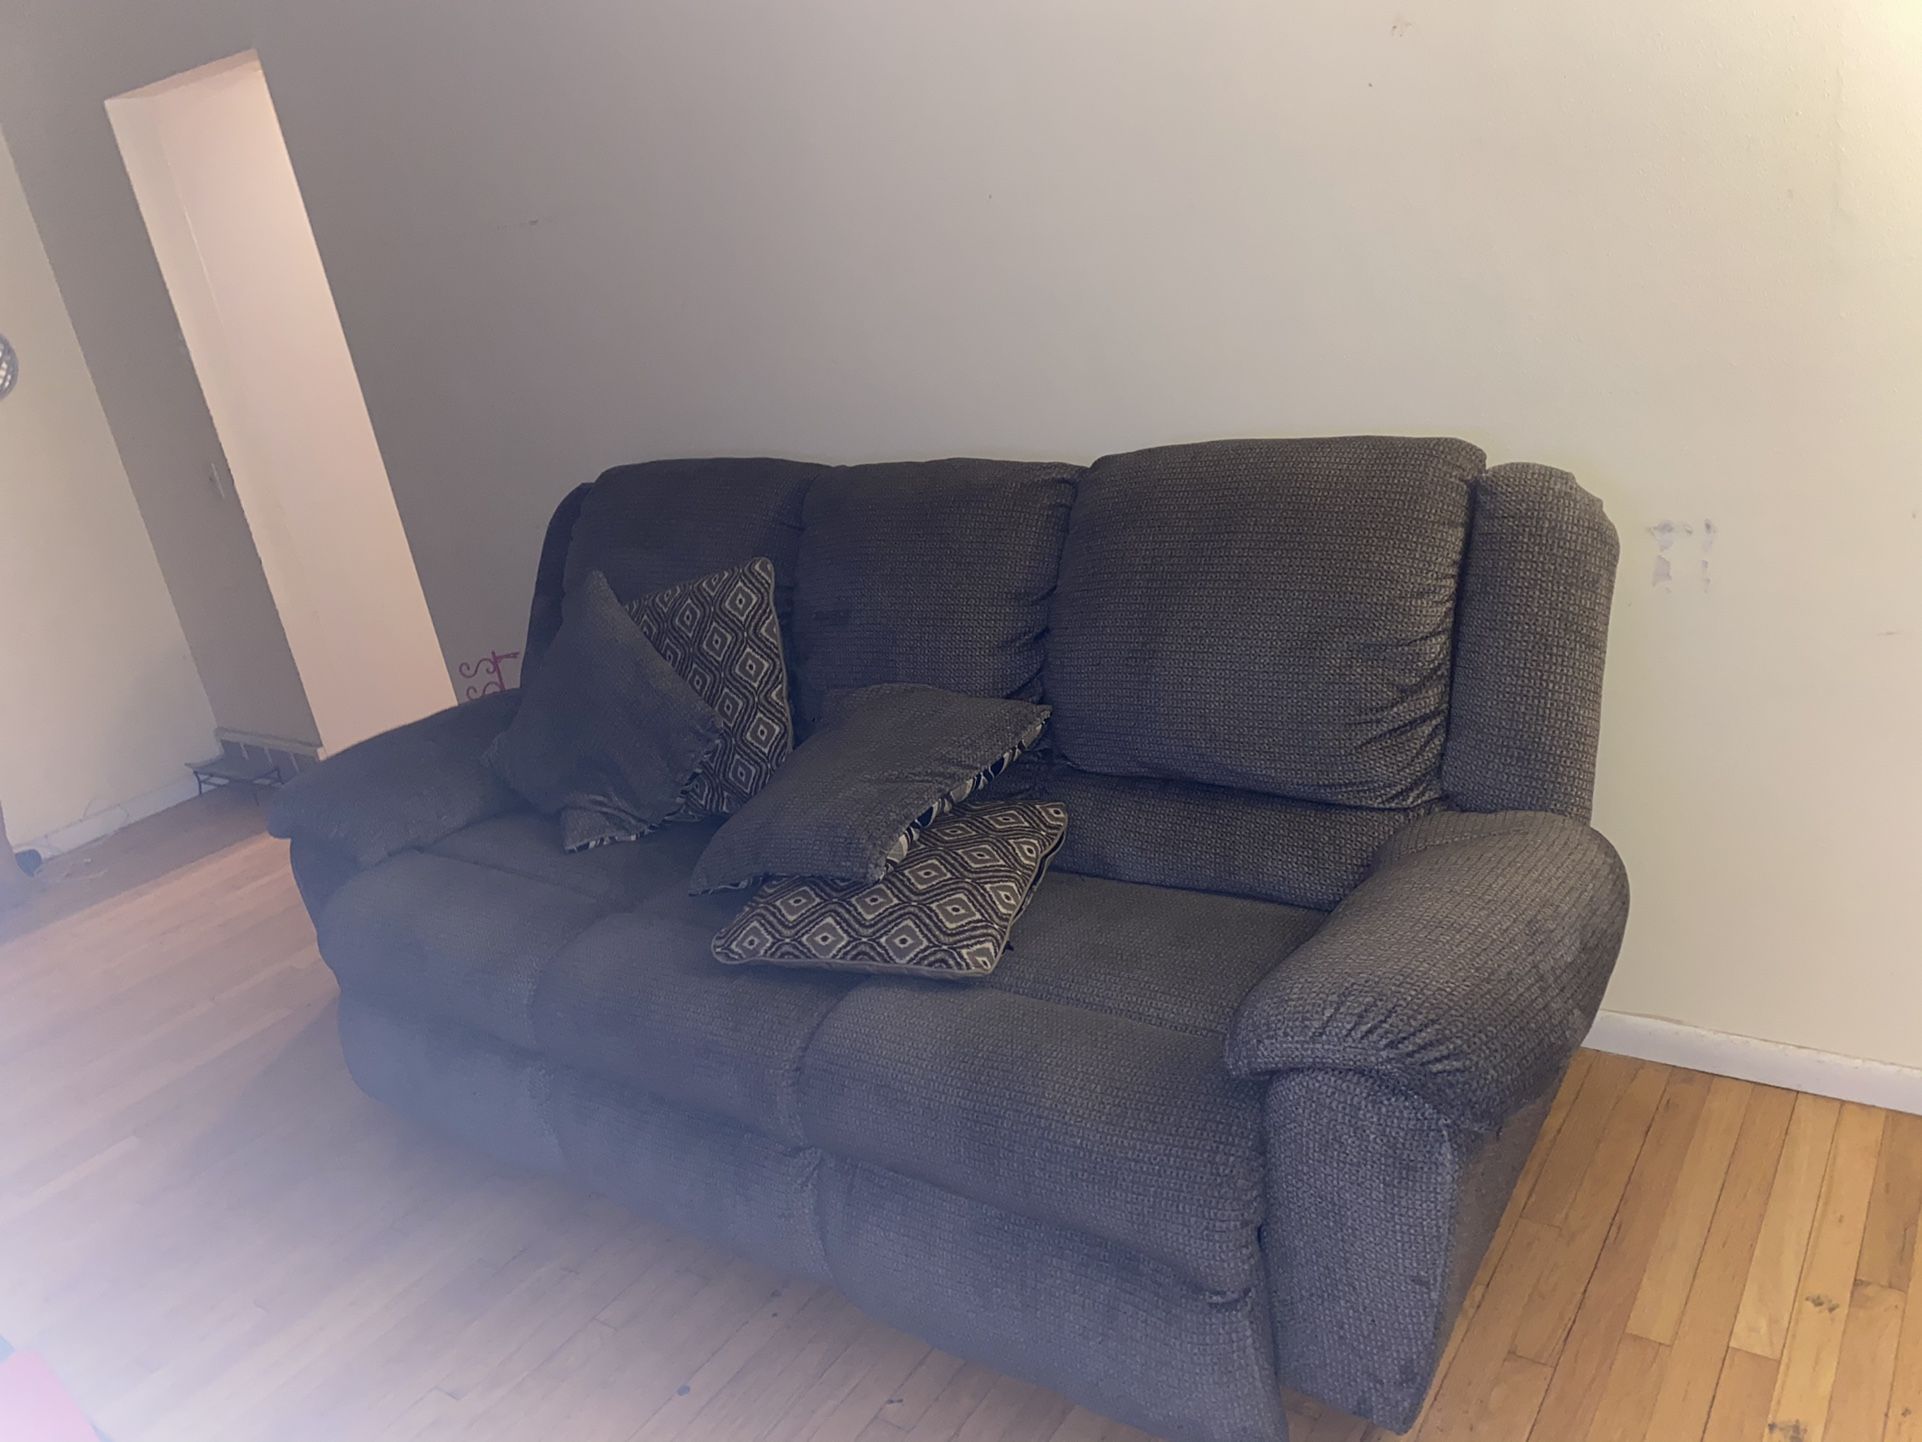 Sofa In Great Condition 